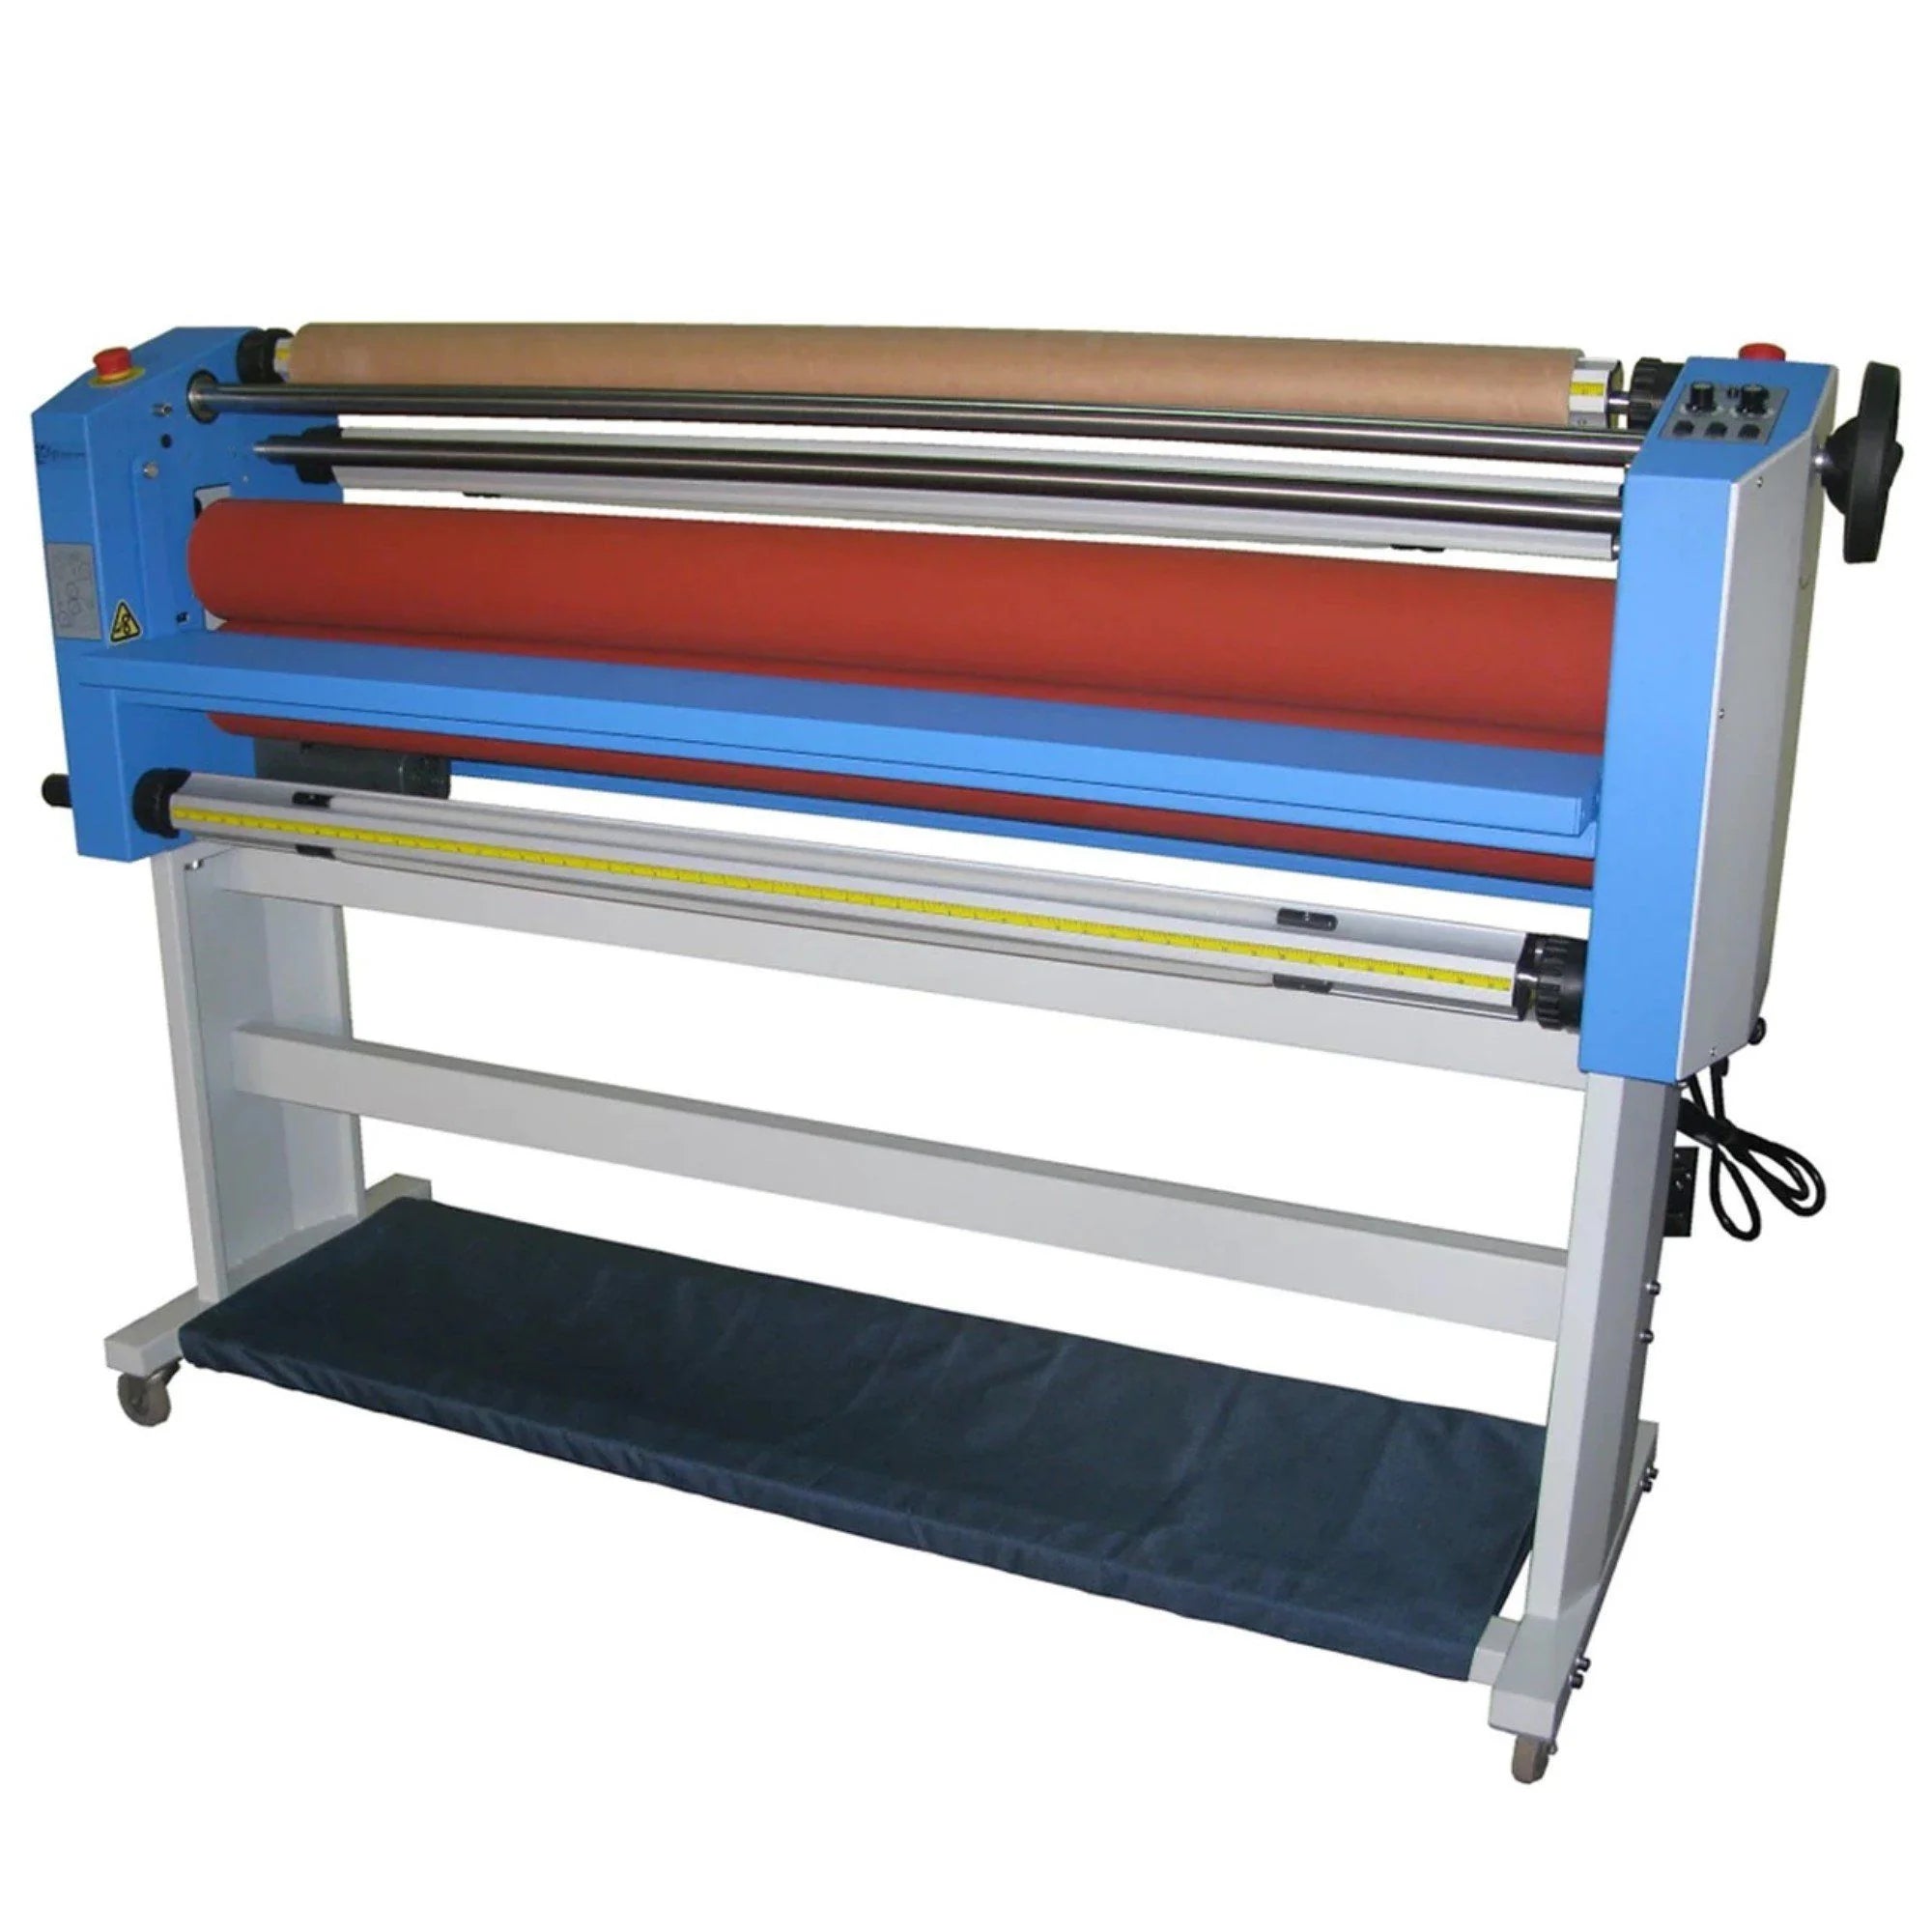 "GFP-355TH Top Heat Wide Format Laminator with Stand - 55" Eco Printers - GFP" - A high-quality top heat wide format laminator with a stand, perfectly compatible with 55" eco printers by GFP.